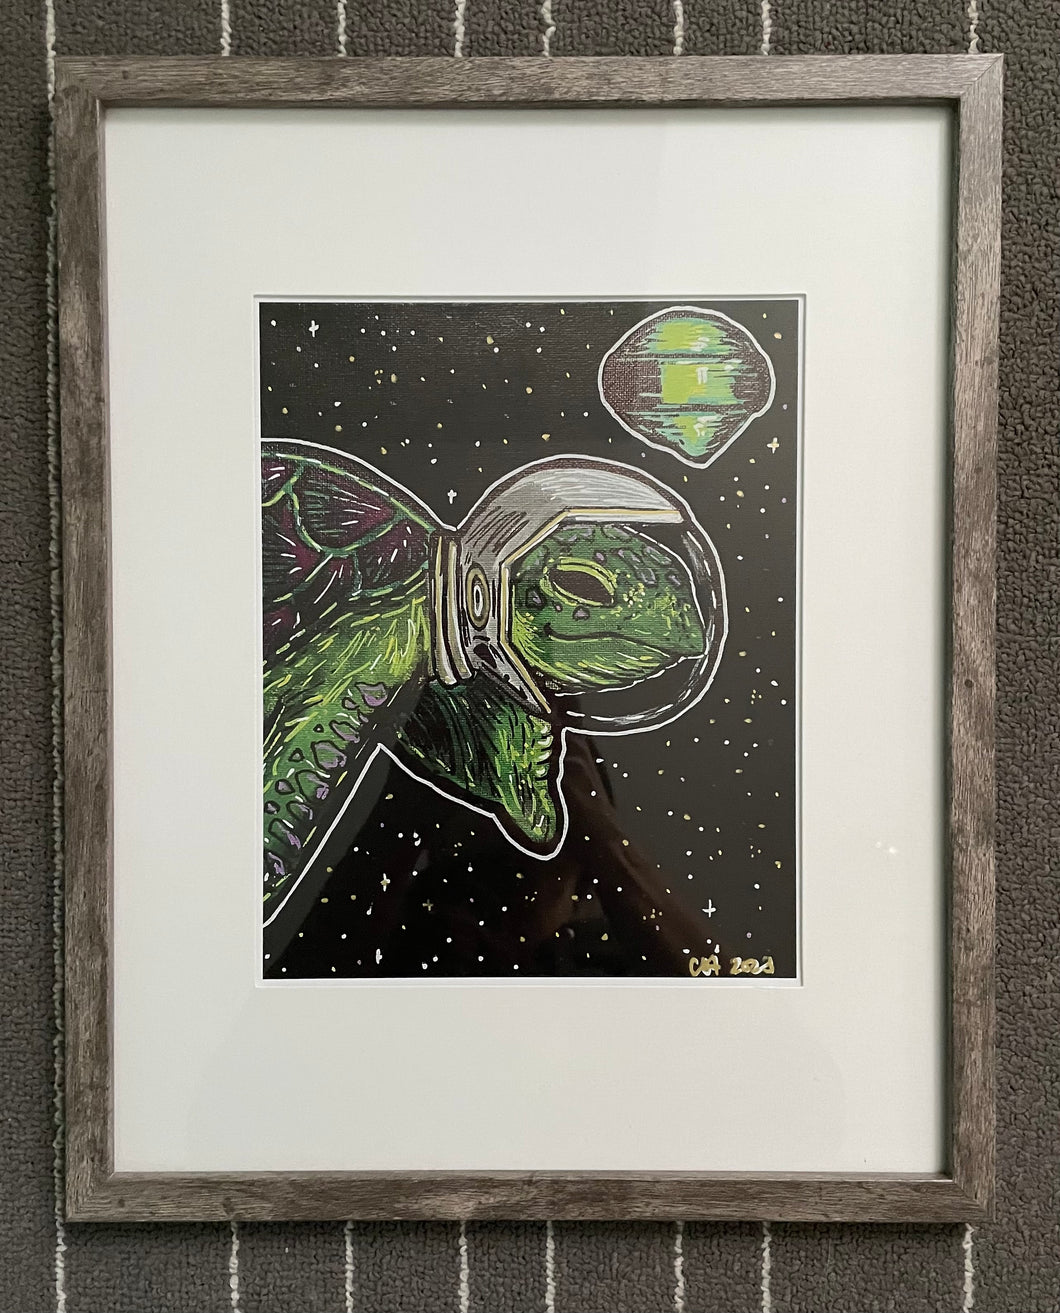 Limited Edition framed Turtle print